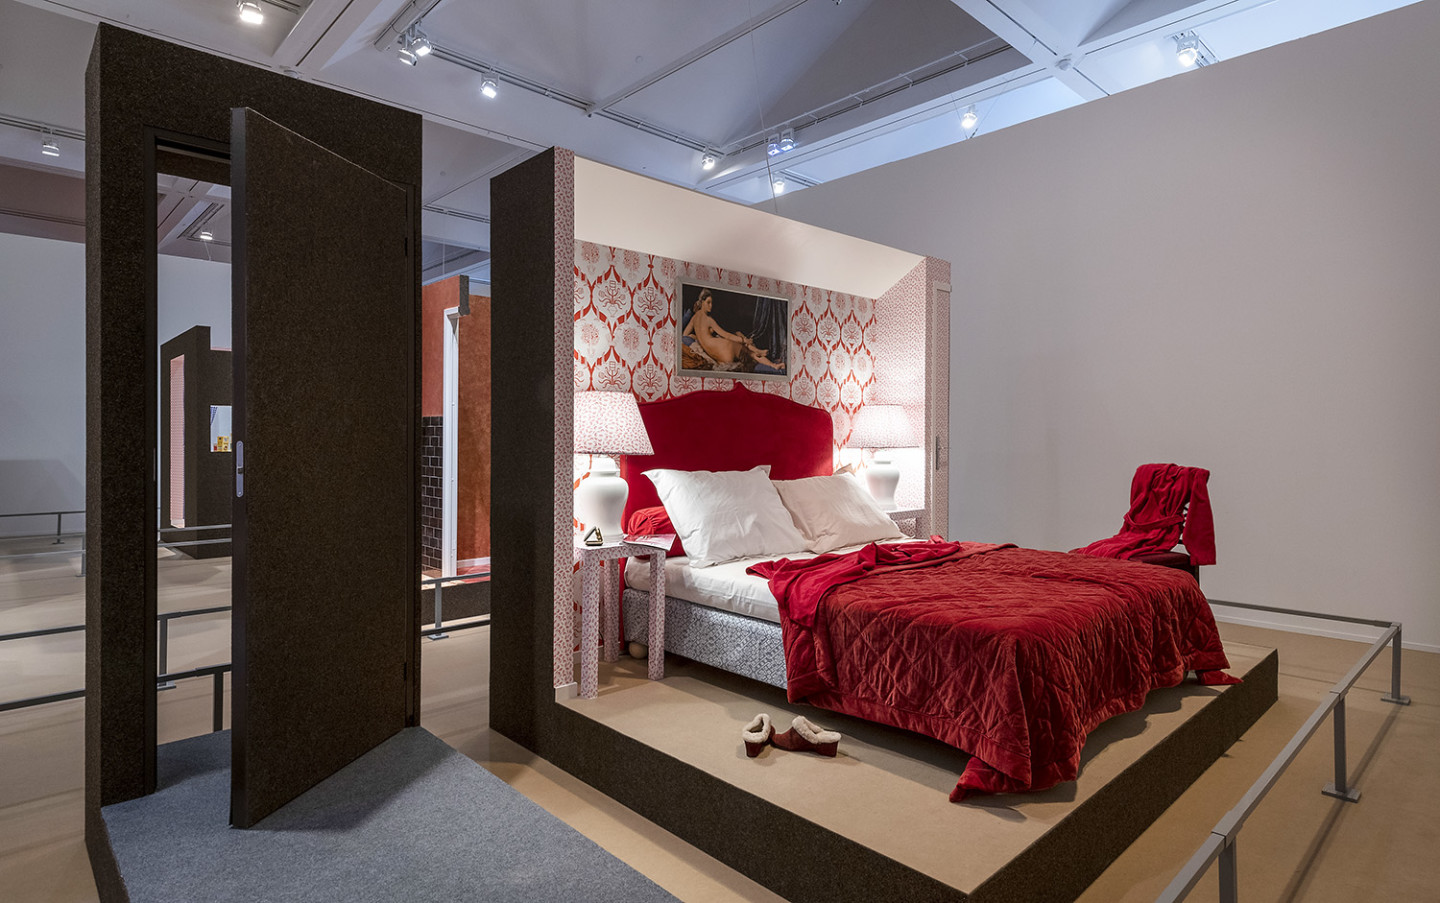 A double bed with red bedspread, bedside lamps and small tables on both sides.